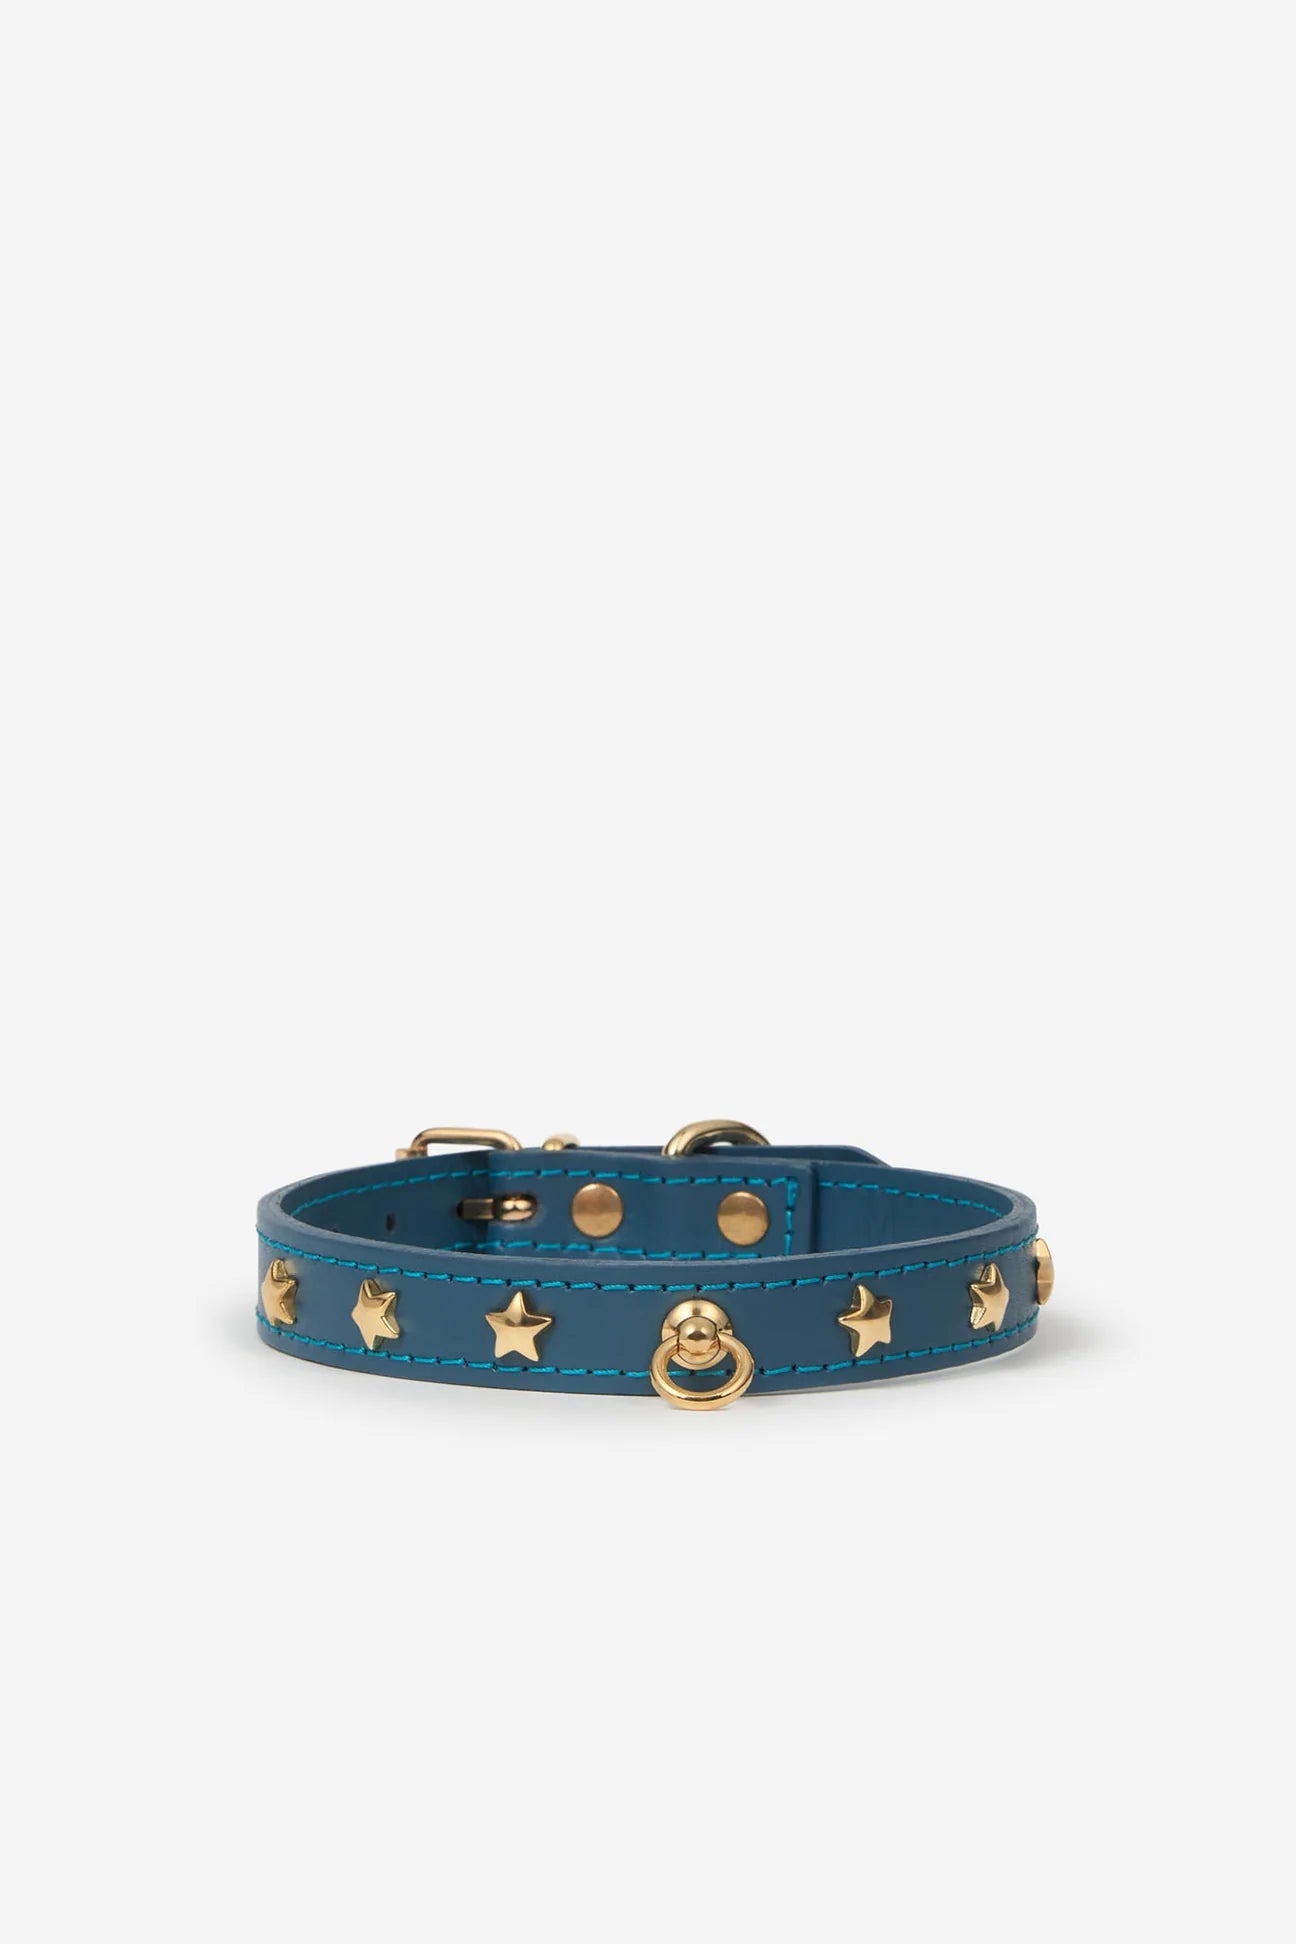 Blue leather dog collar with golden studs